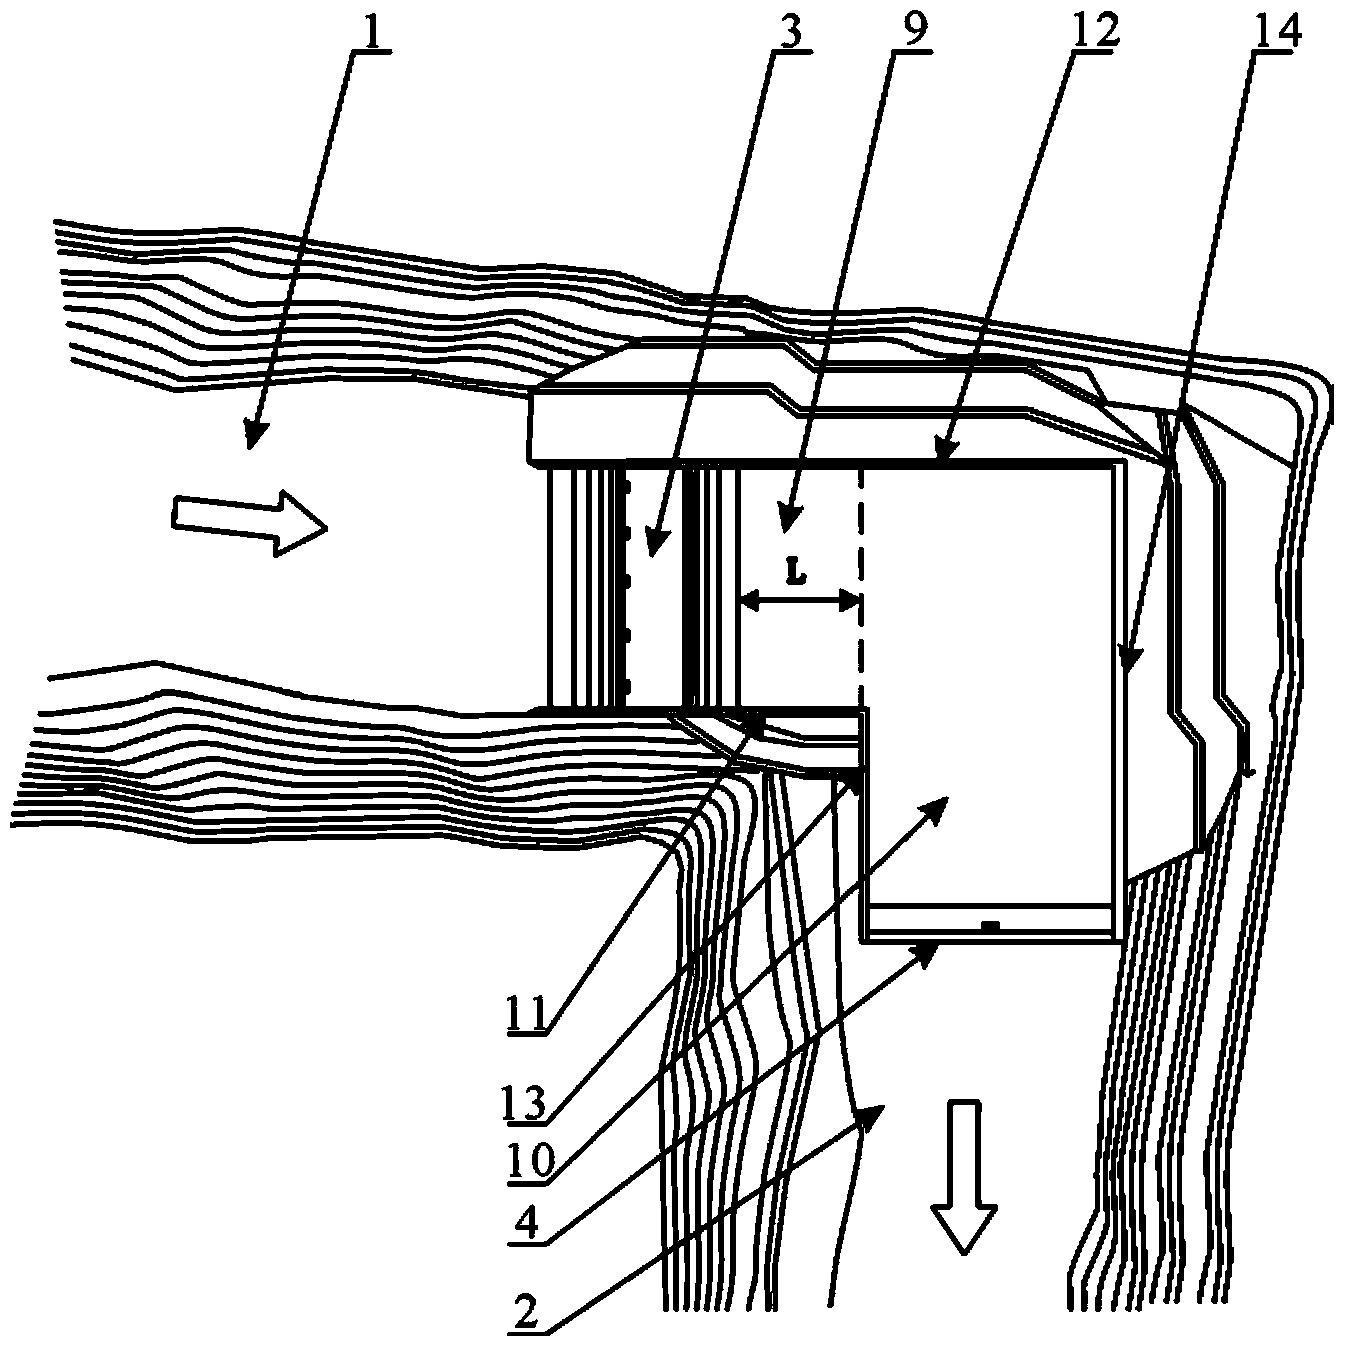 Stilling pool with laterally-effluent revolution and rolling energy dissipation function